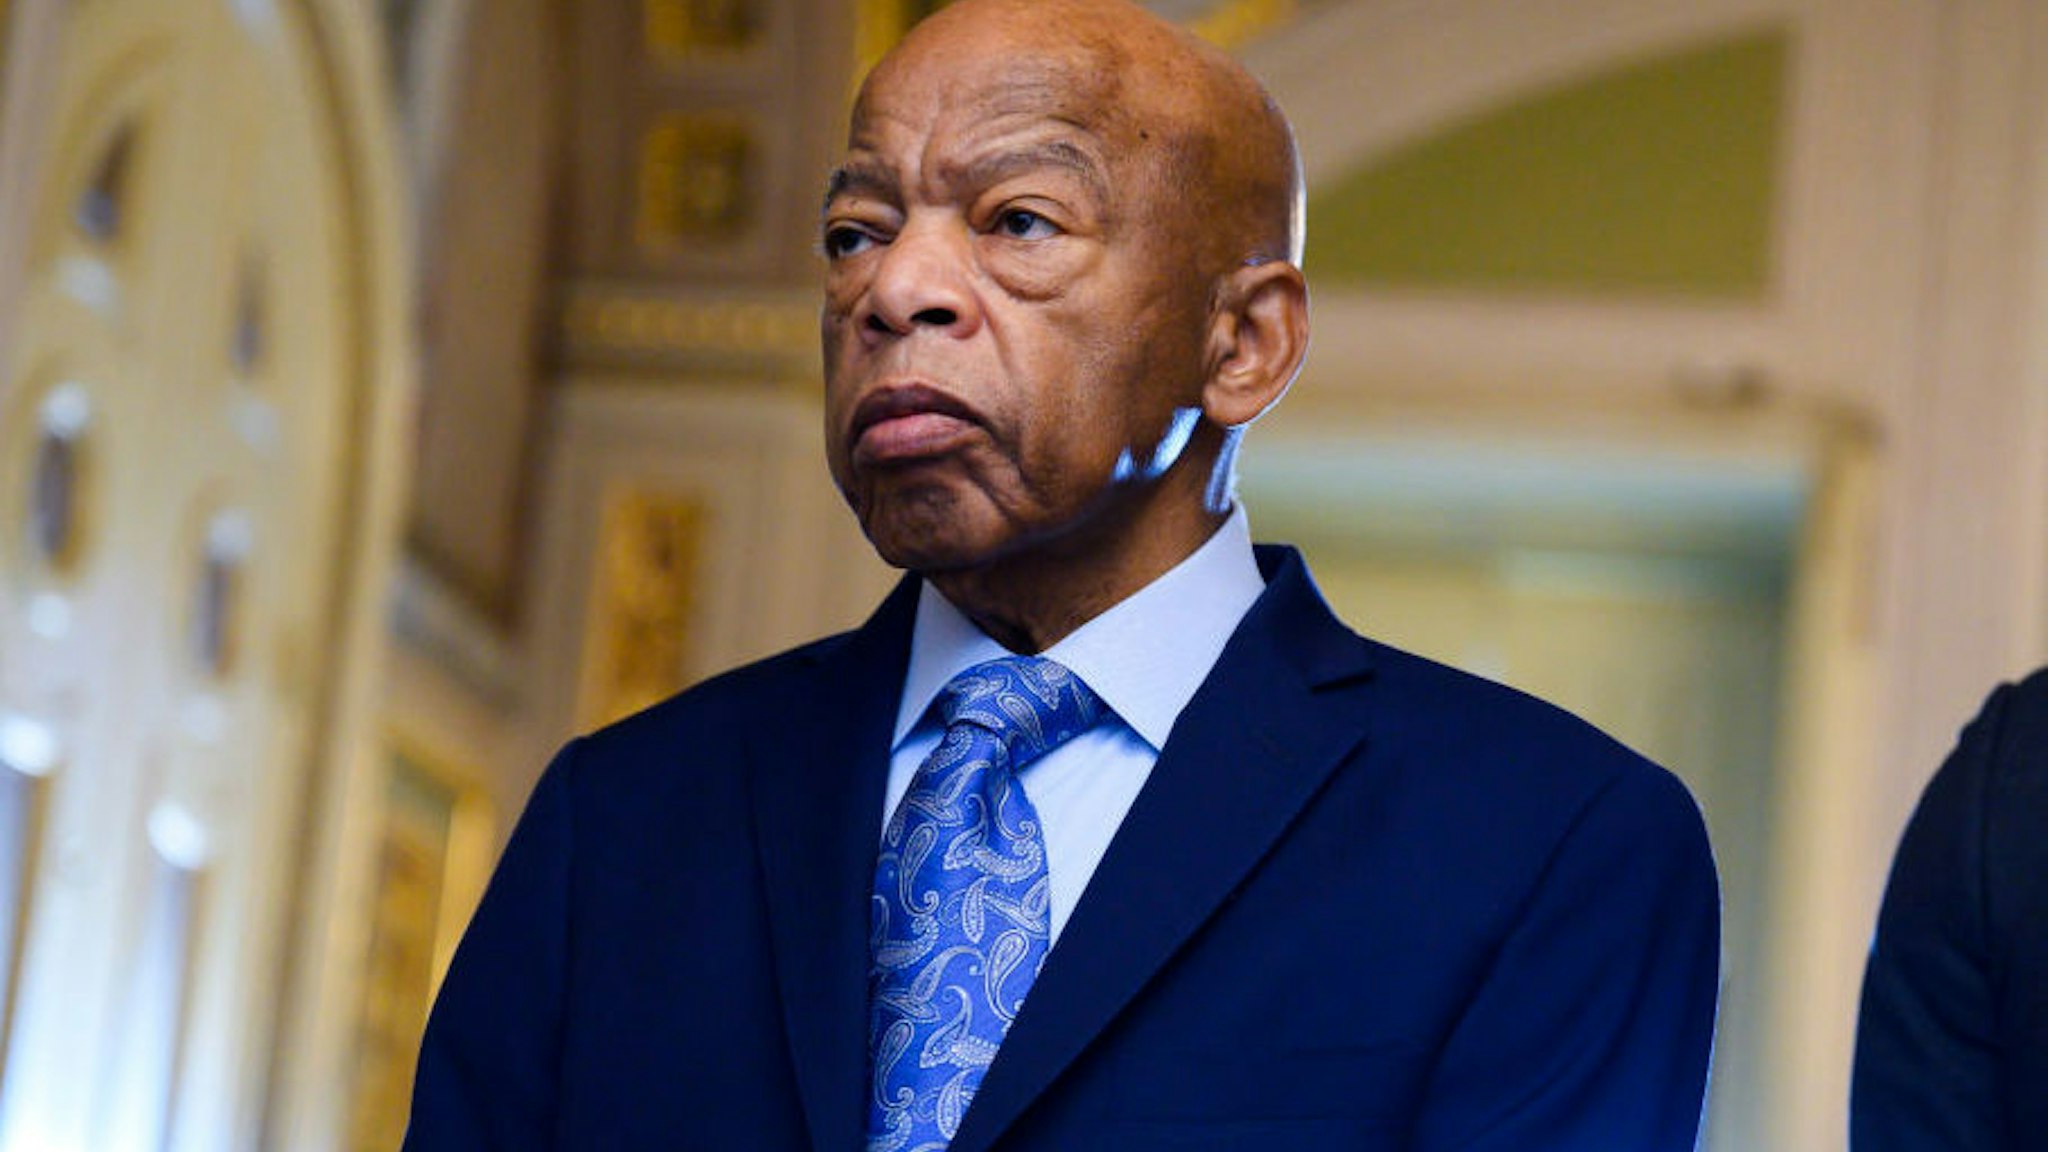 UNITED STATES - DECEMBER 3: Rep. John Lewis, D-Ga., waits to enter the Senate chamber to listen to the farewell address of the Sen. Johnny Isakson, R-Ga., in the Capitol on Tuesday, December 3, 2019.